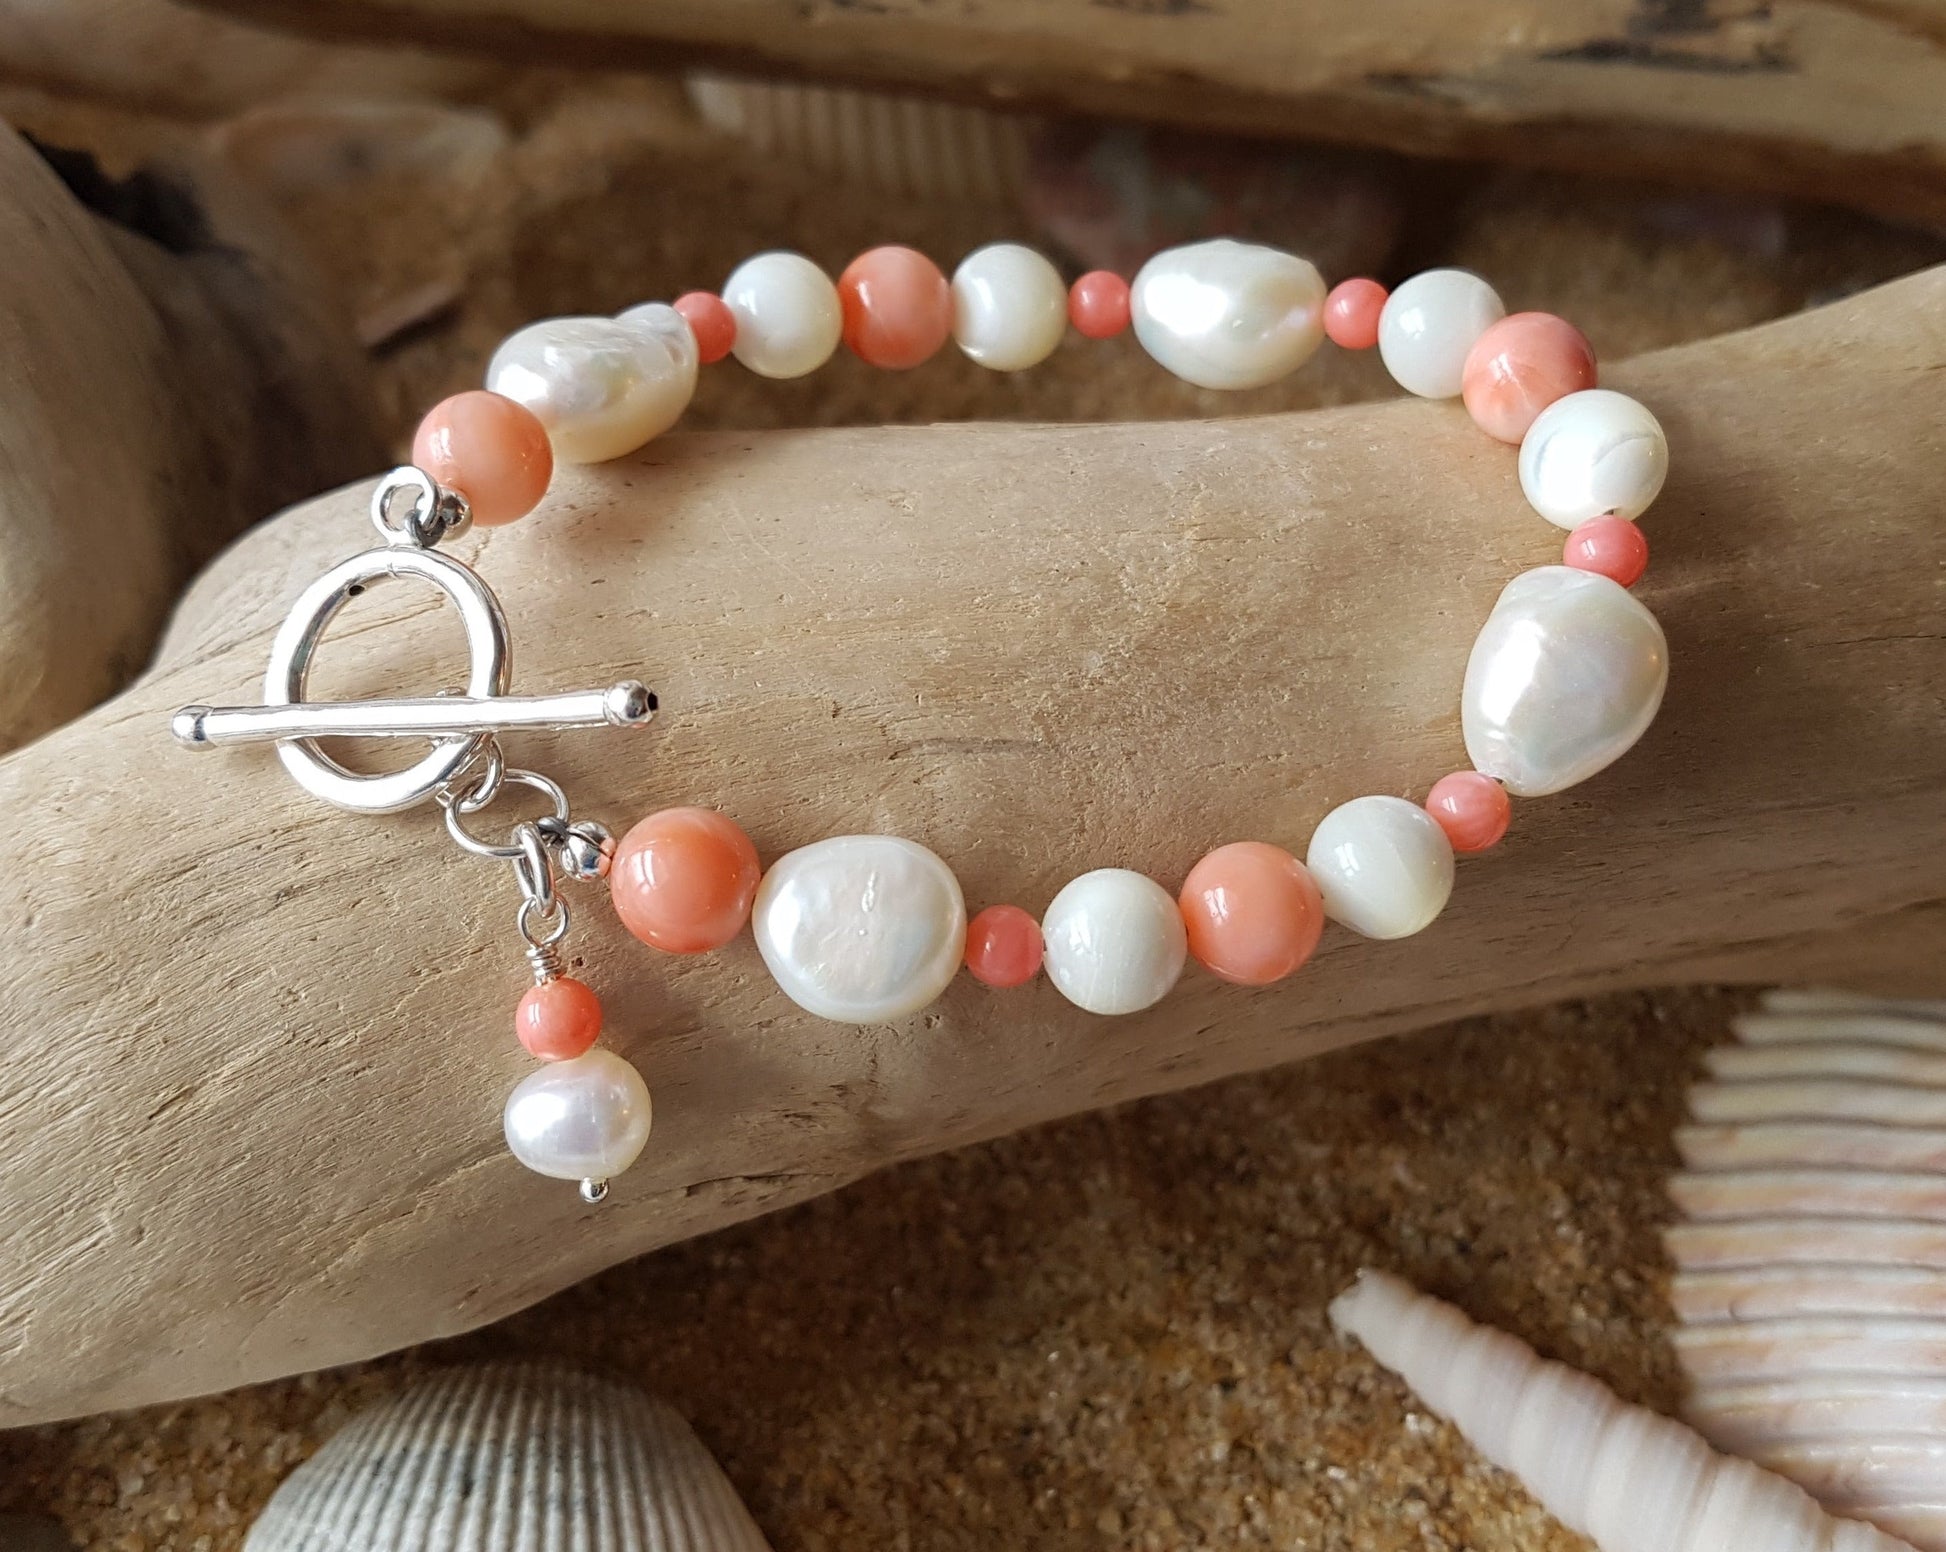 Angle Skin Coral, Mother of Pearl, Freshwater Cultured Pearl Beaded Bracelet. Pale orange Coral, white Mother of Pearl, white Pearls. Round Toggle clasp. Sterling Silver